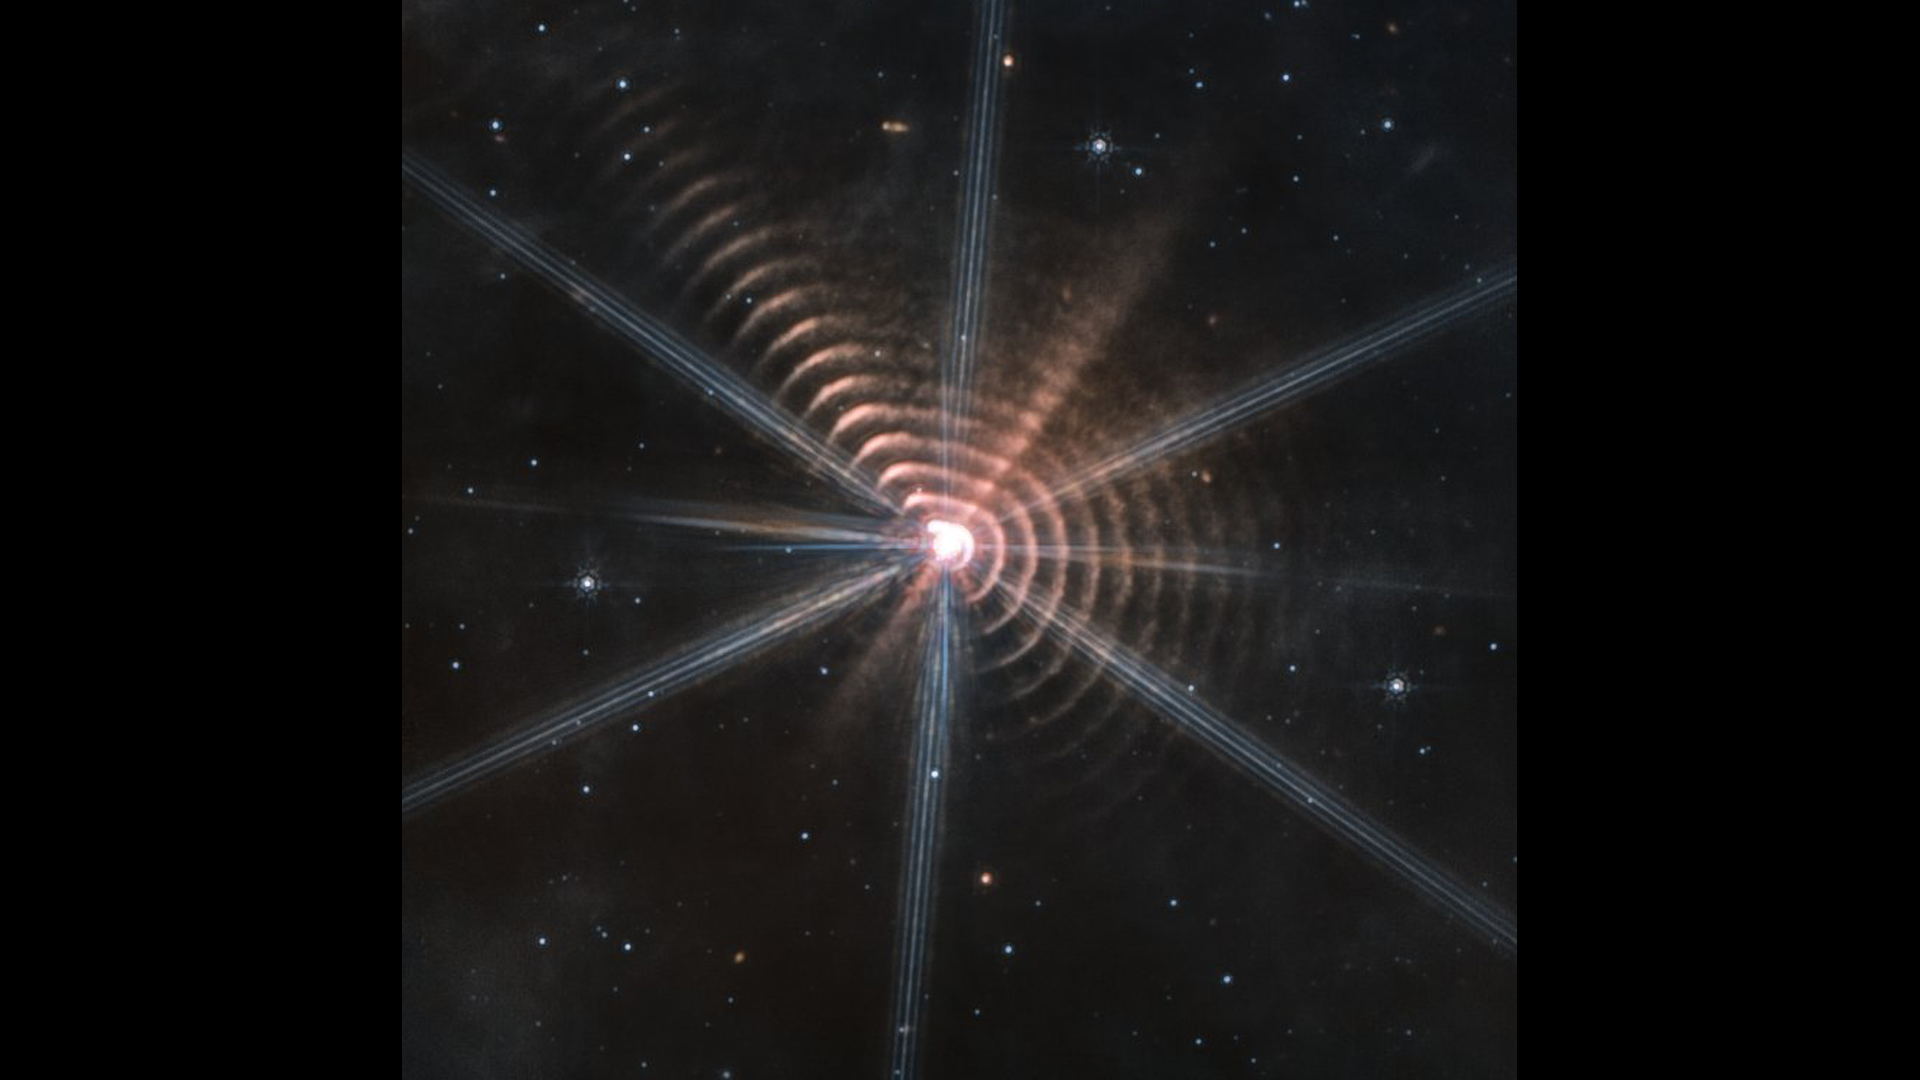 Bizarre rings spied by James Webb Space Telescope are organic dust propelled by starlight thumbnail